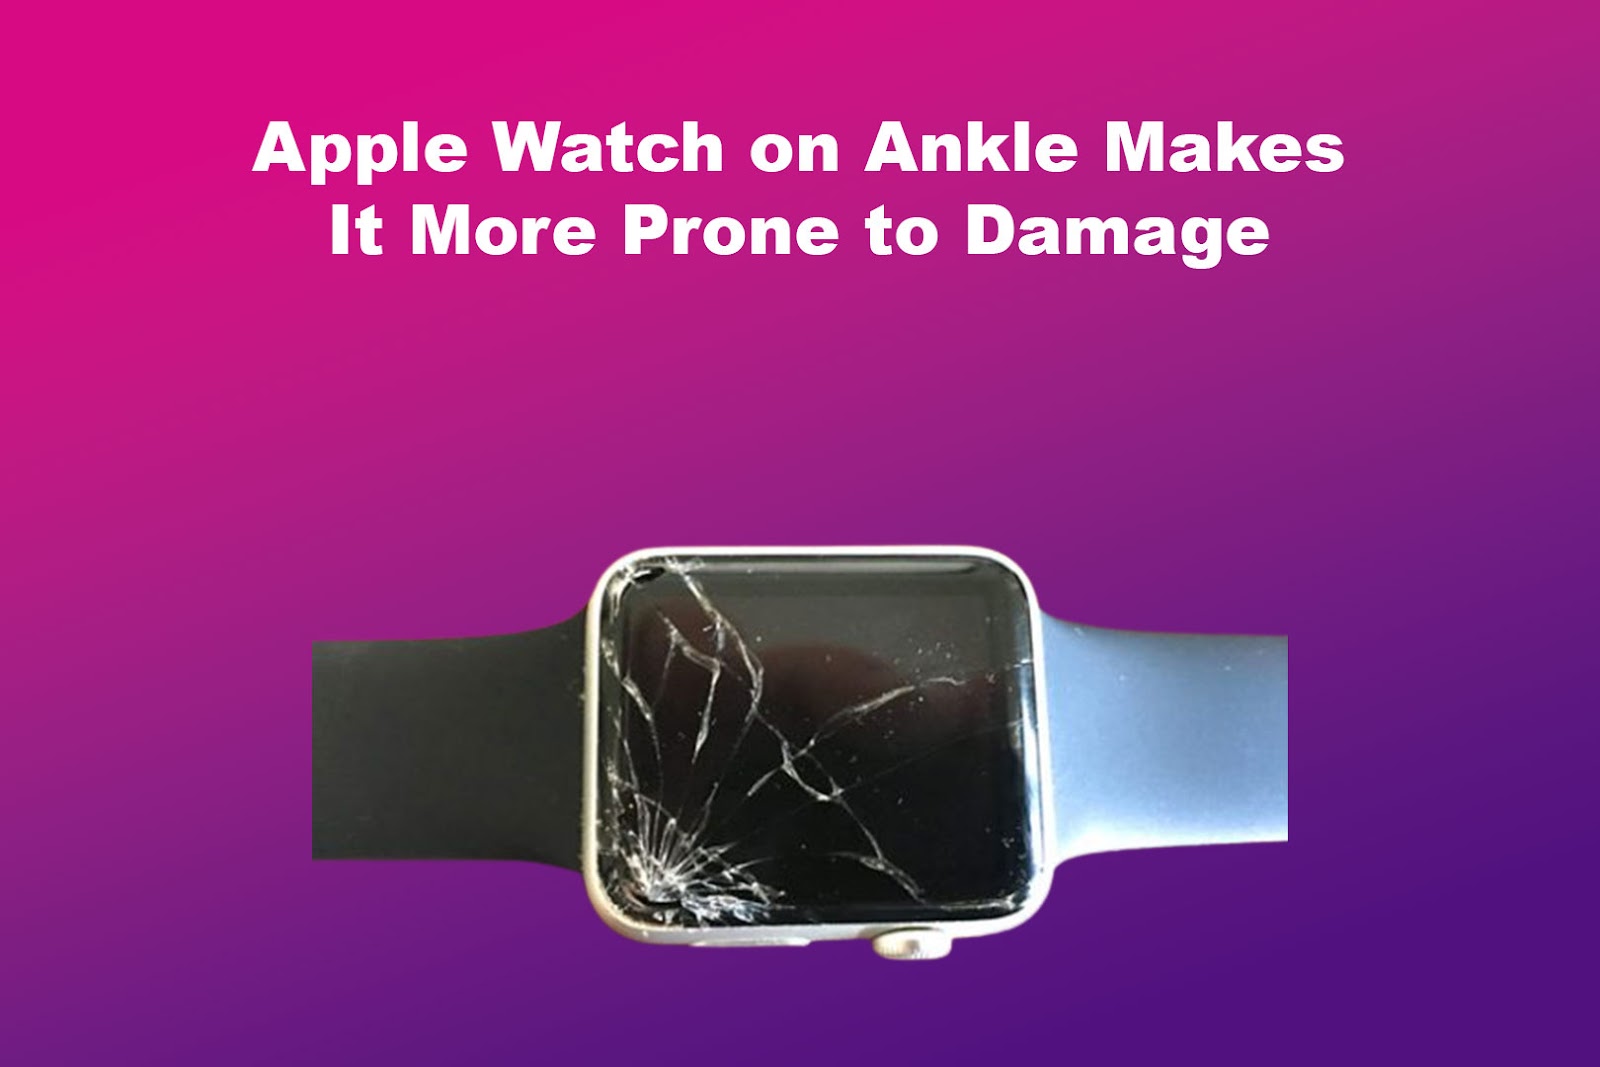 Apple Watch on Ankle Makes It More Prone to Damage